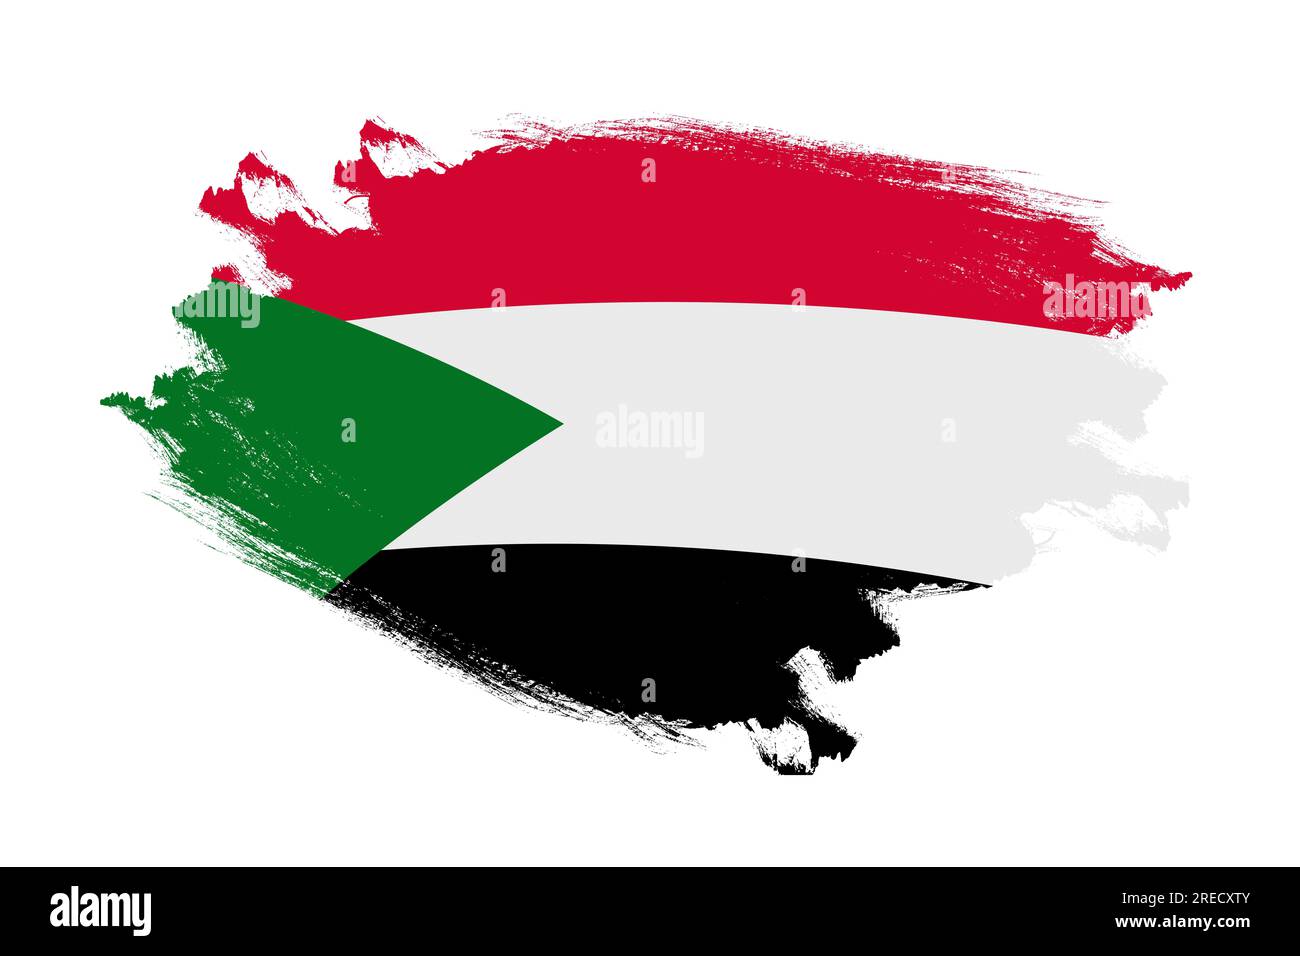 Abstract stroke brush textured national flag of Sudan on isolated white background Stock Photo